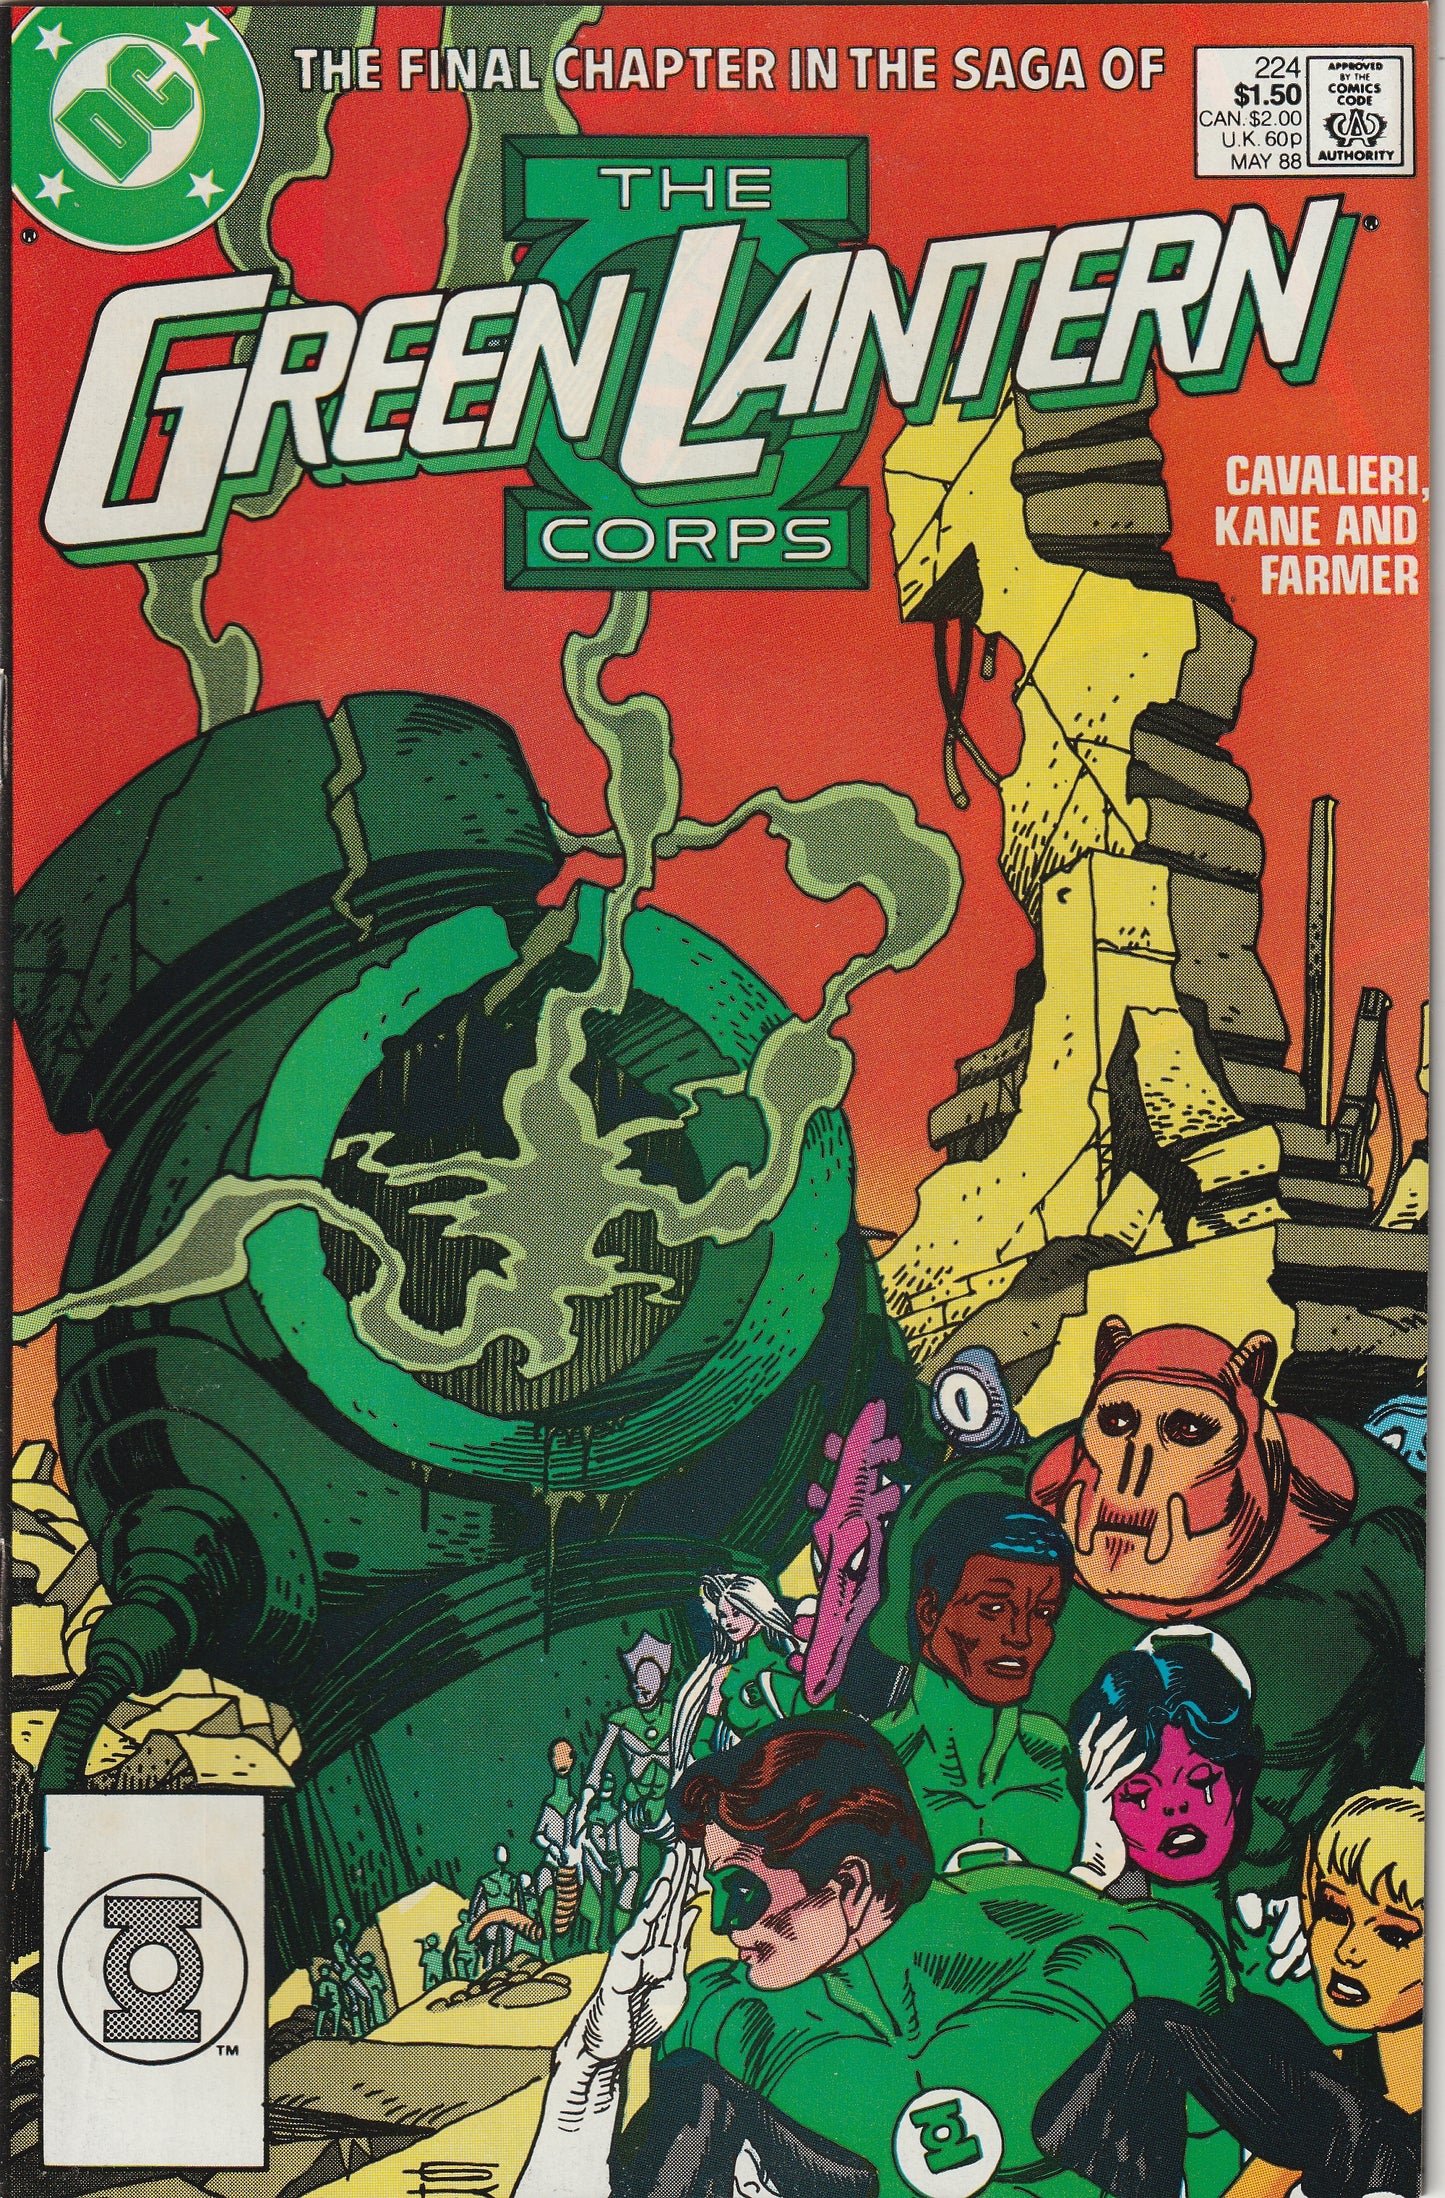 Green Lantern Corps #224 (1988) - Final issue of series